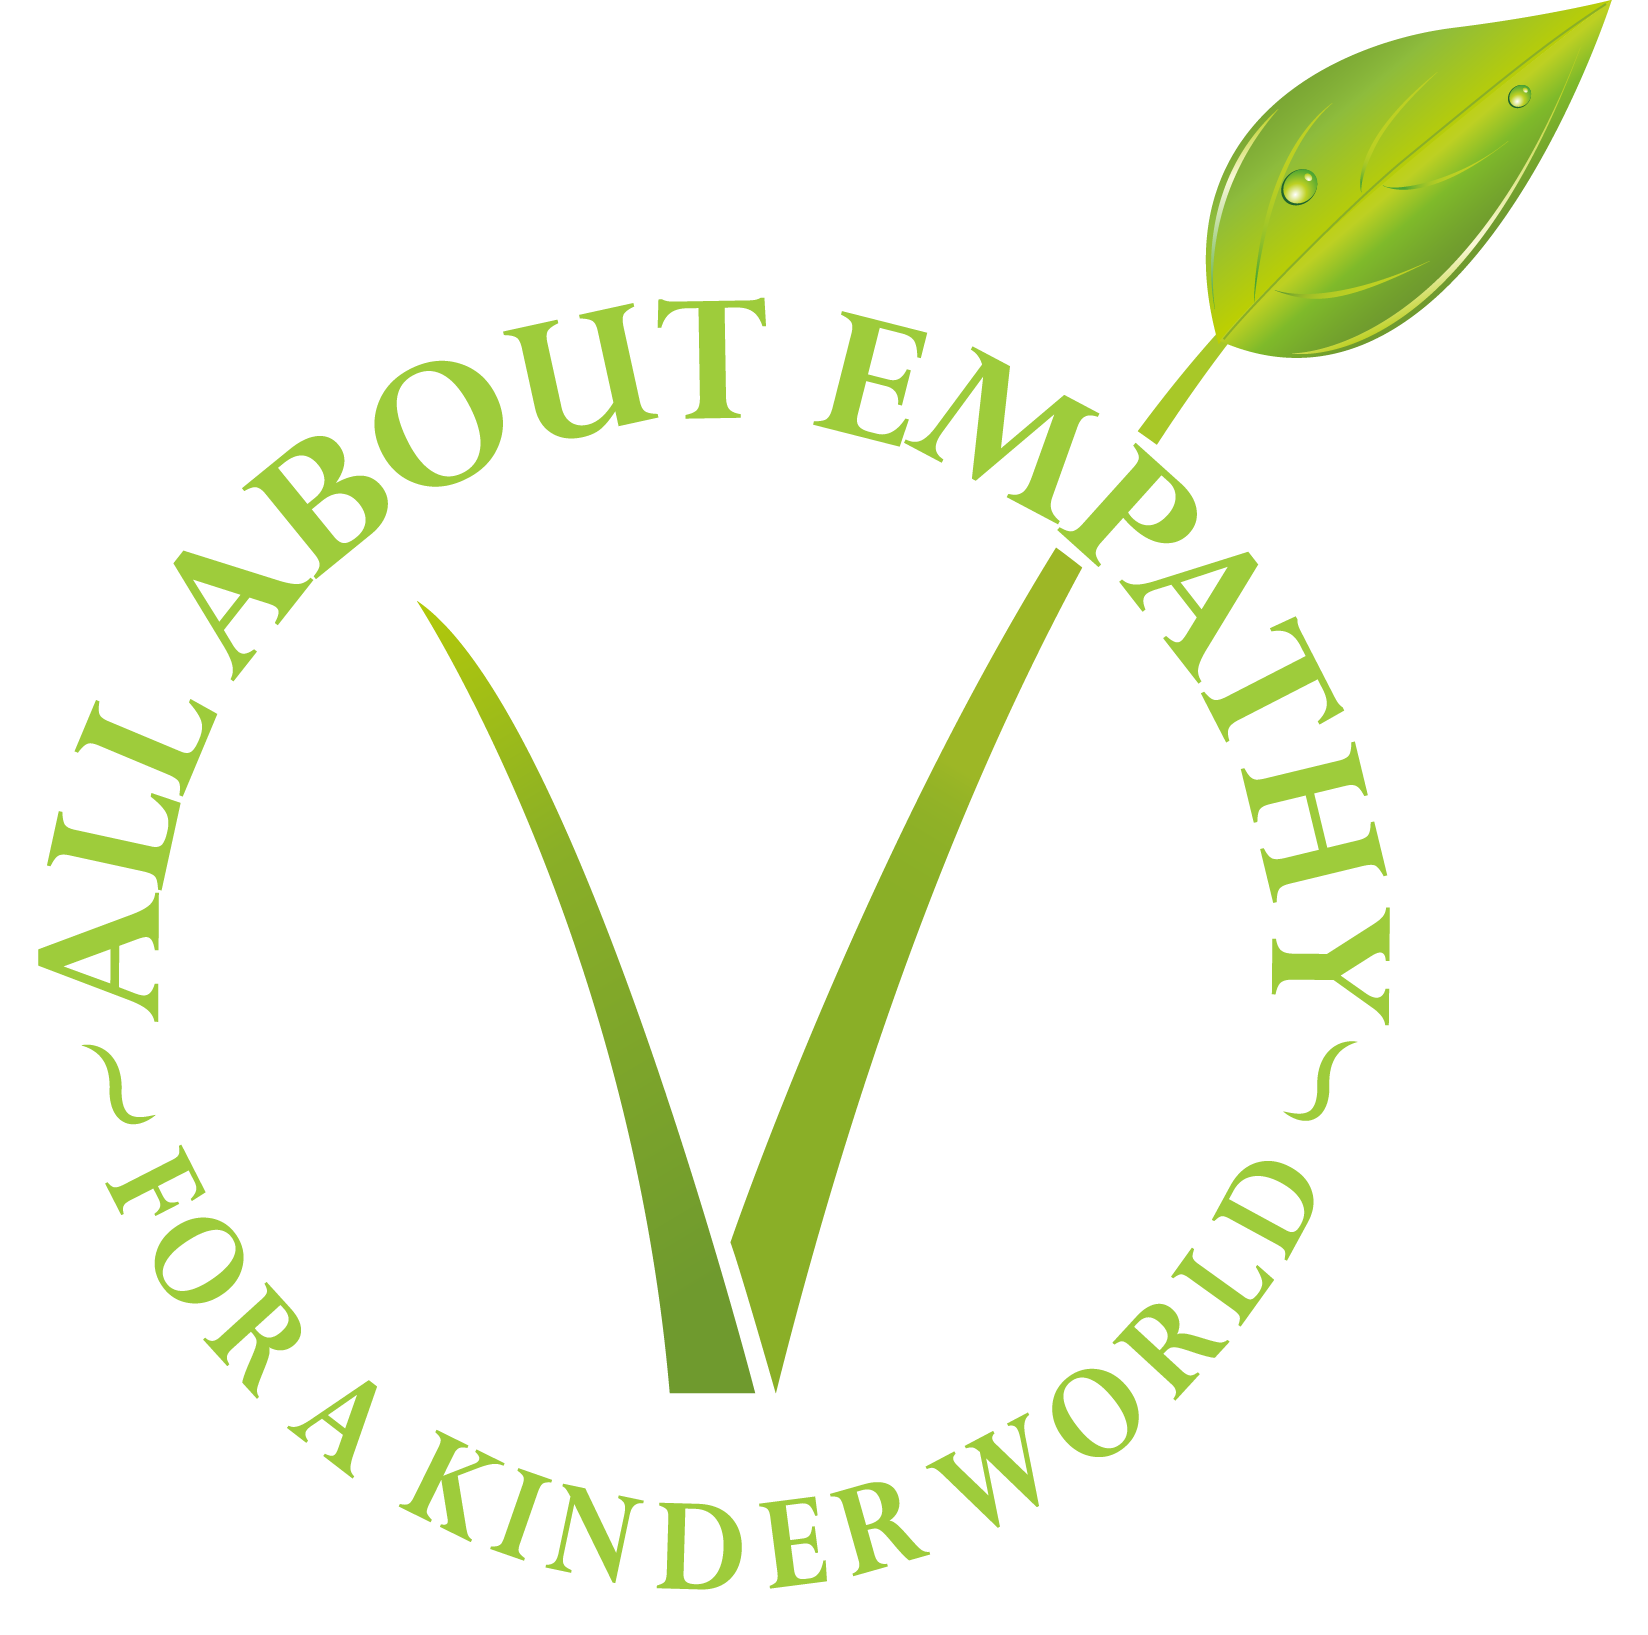 All About Empathy logo